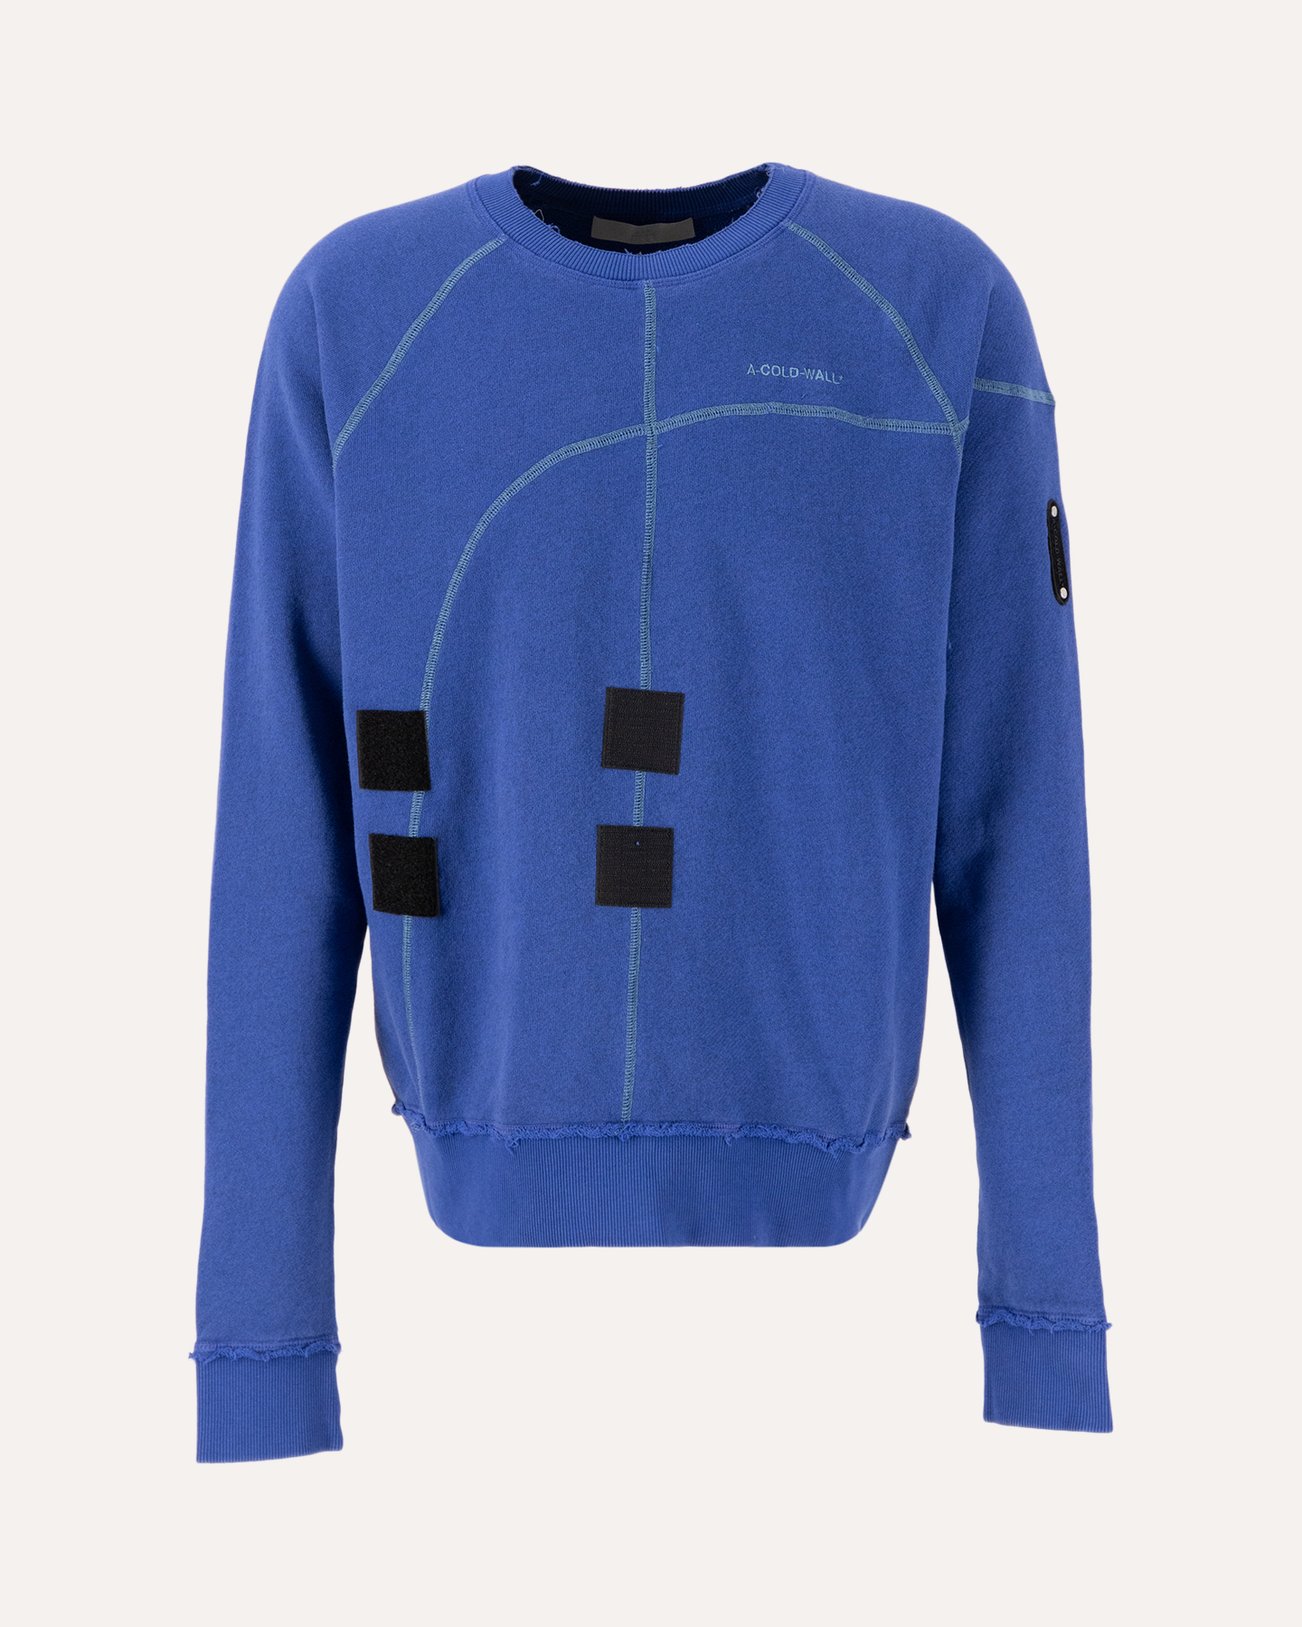 A-COLD-WALL* Intersect Crewneck BLAUW 1